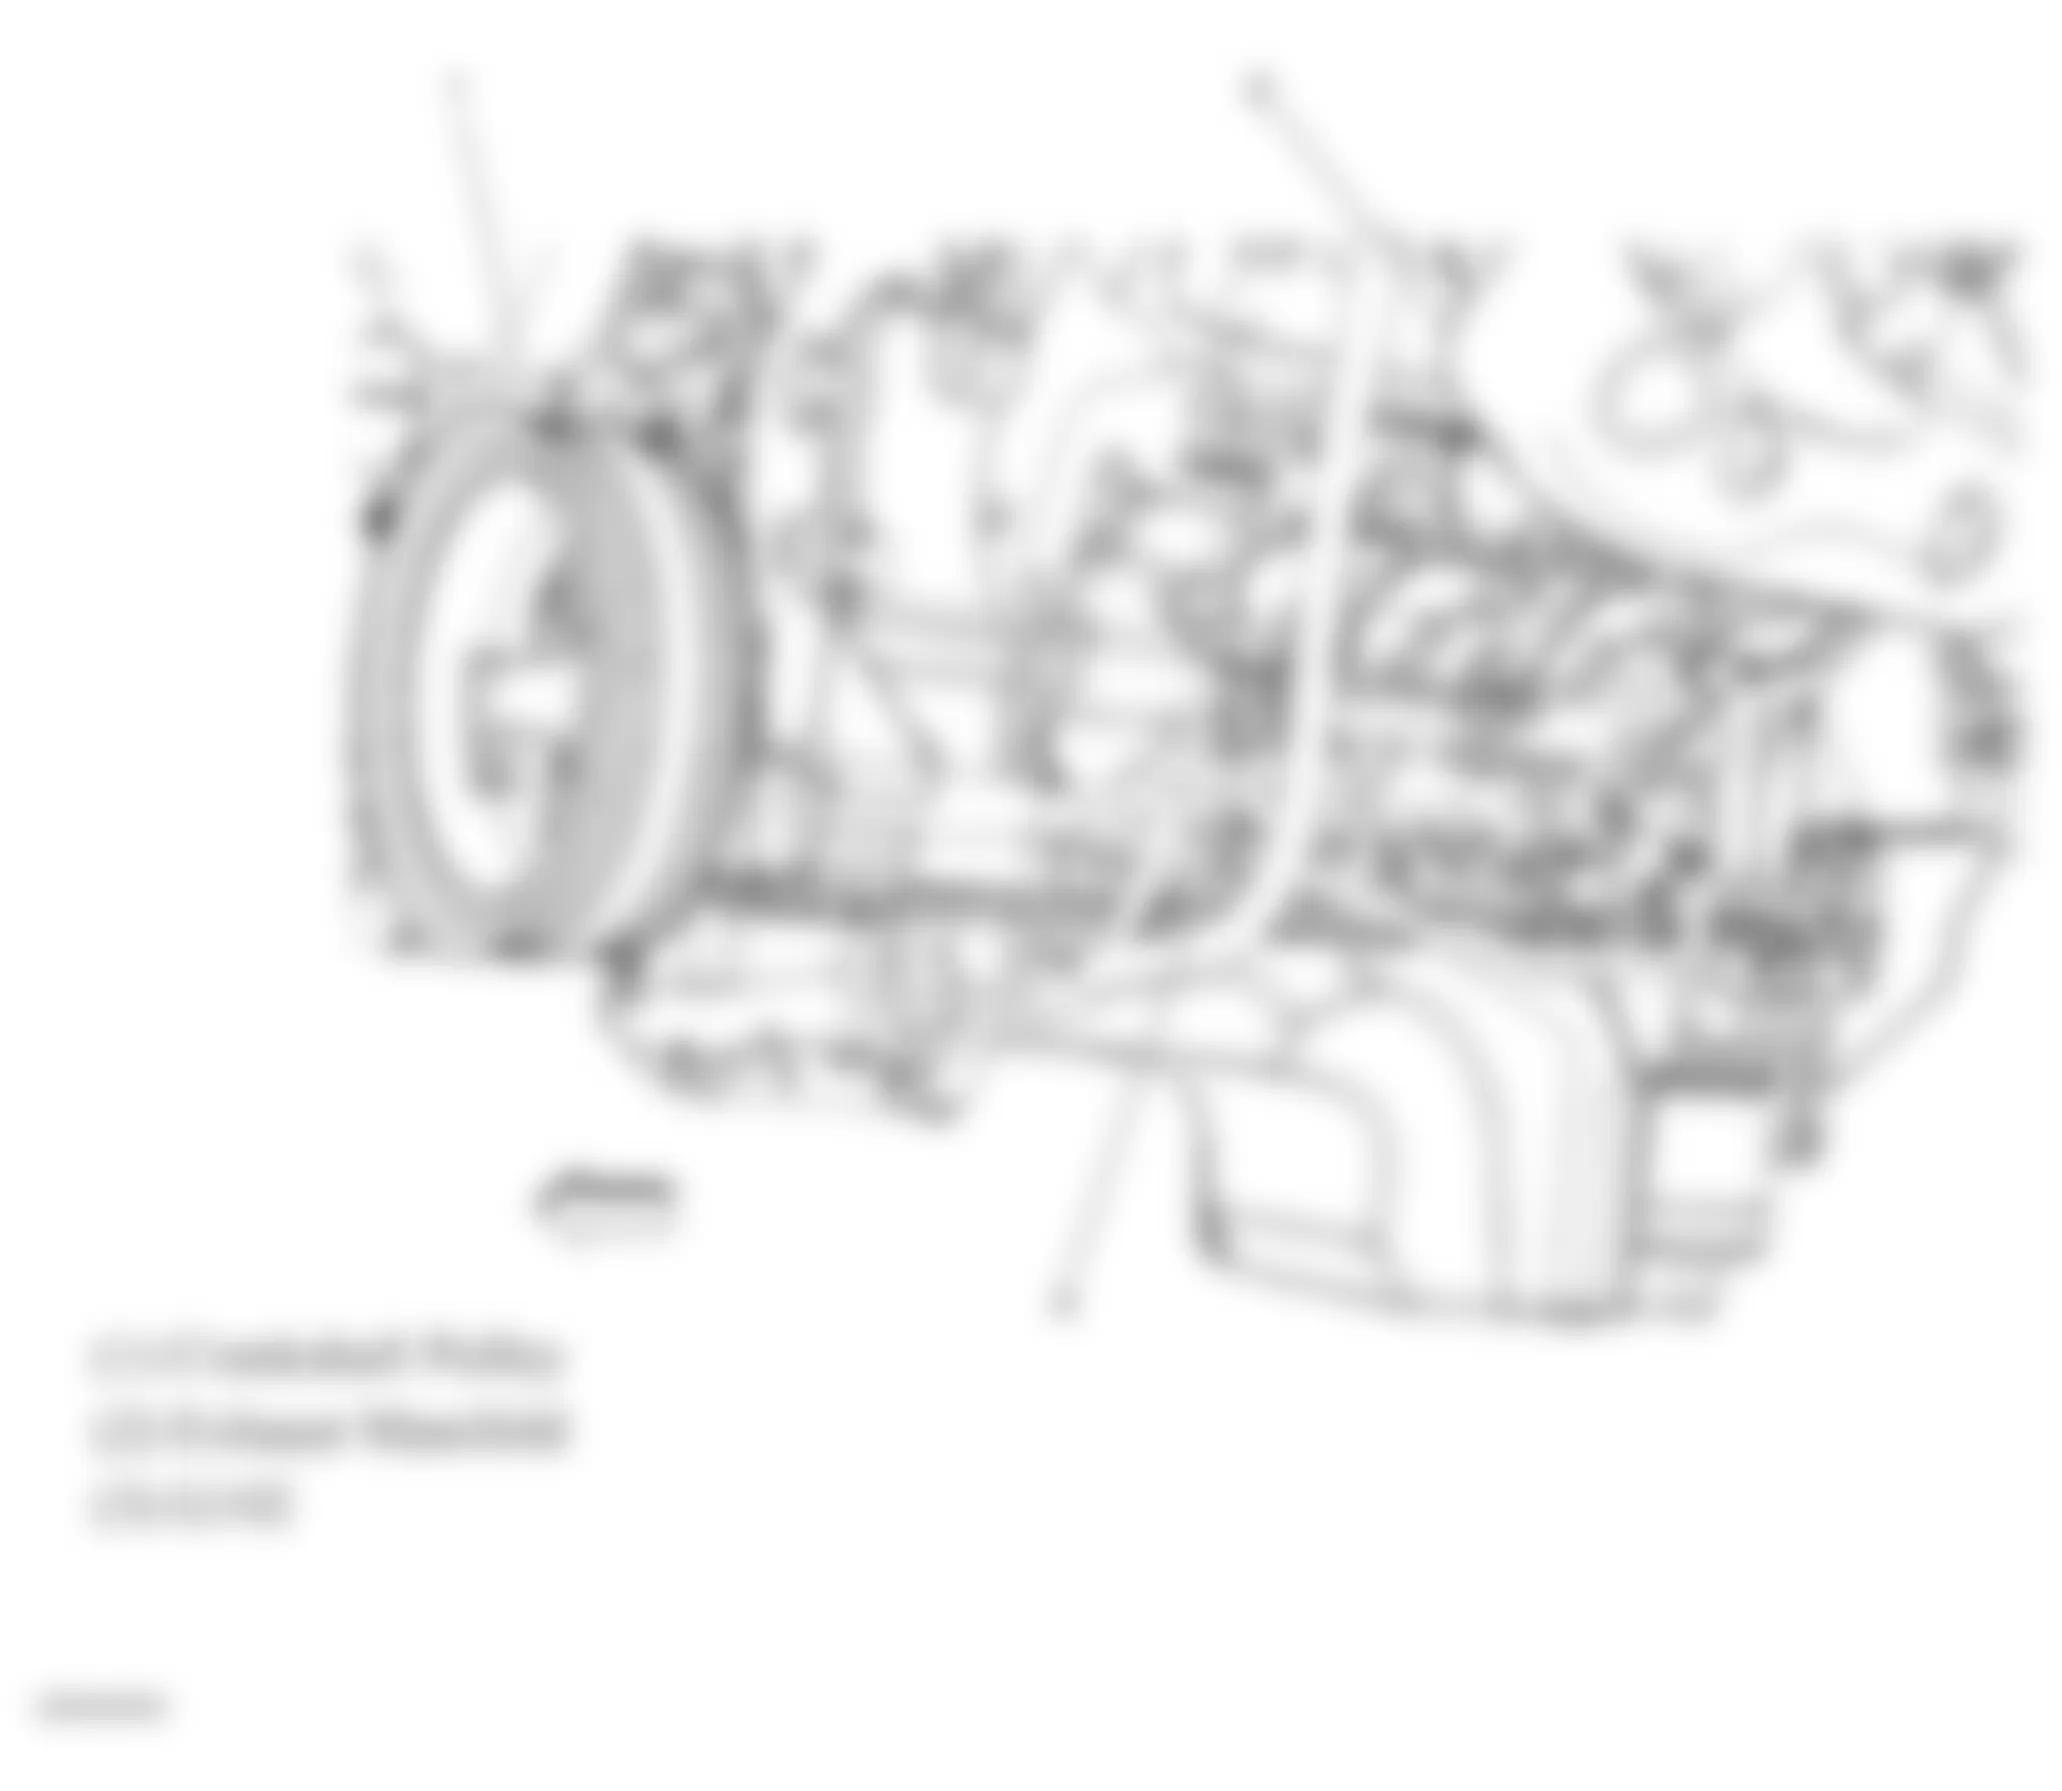 Chevrolet Silverado 3500 HD 2010 - Component Locations -  Lower Front Of Engine